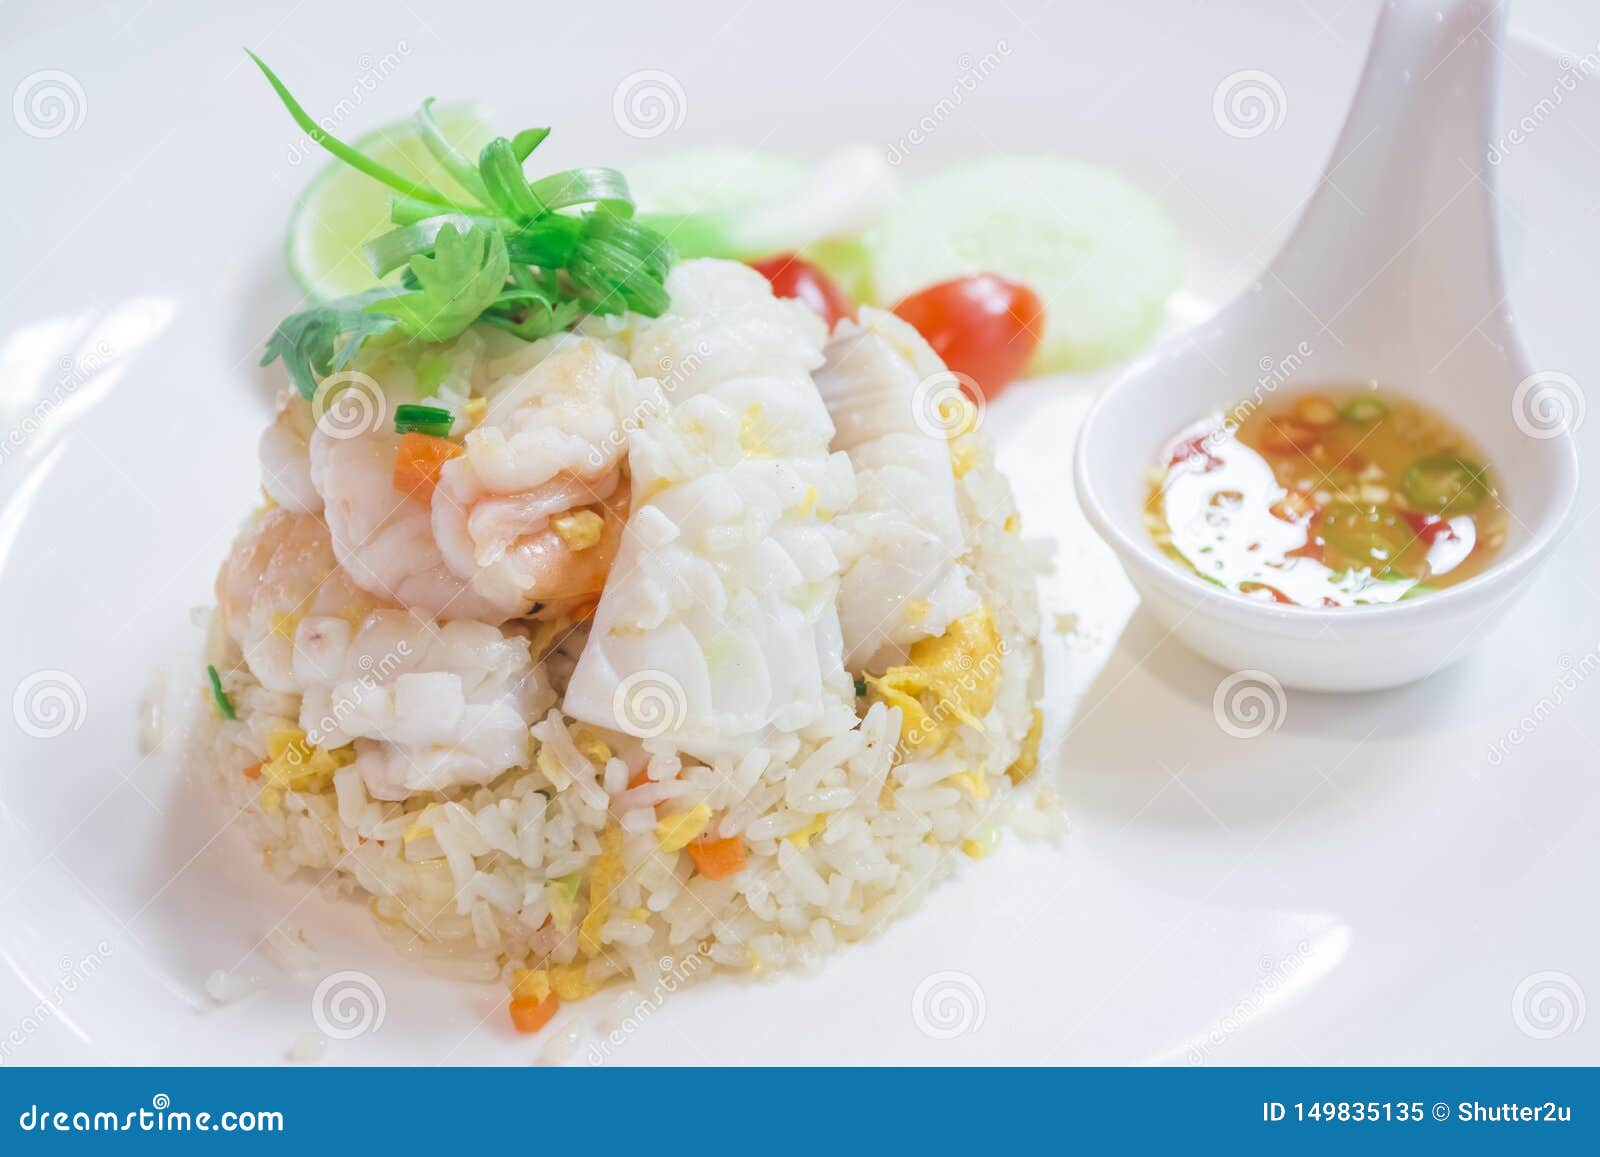 Thai Dishes Called Kao Pad, Stir Fried Rice Seafood, Chinese Food ...